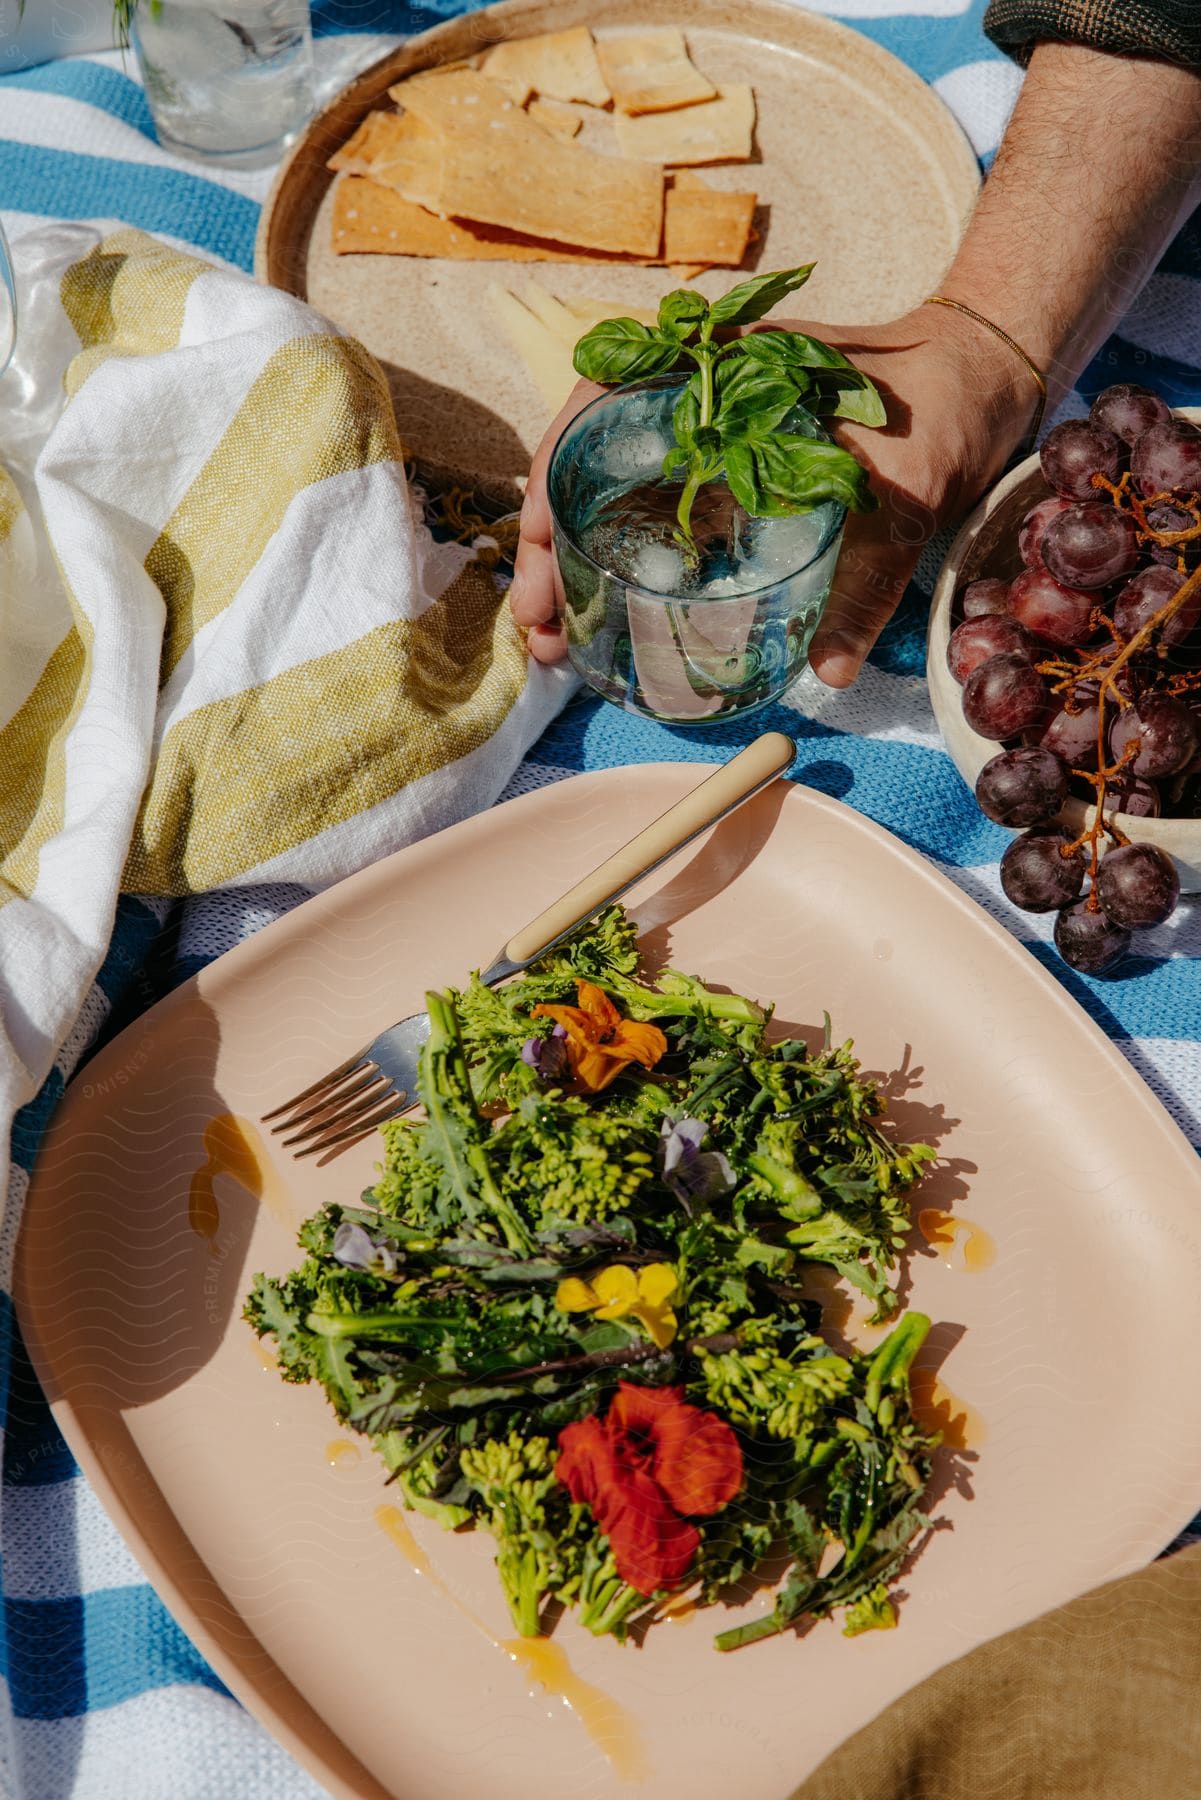 Outdoor picnic with a plate of green salad garnished with edible flowers, a glass of water with basil, and a bowl of grapes, with cheese and crackers on a round tray, all laid on a blue and white checkered cloth.